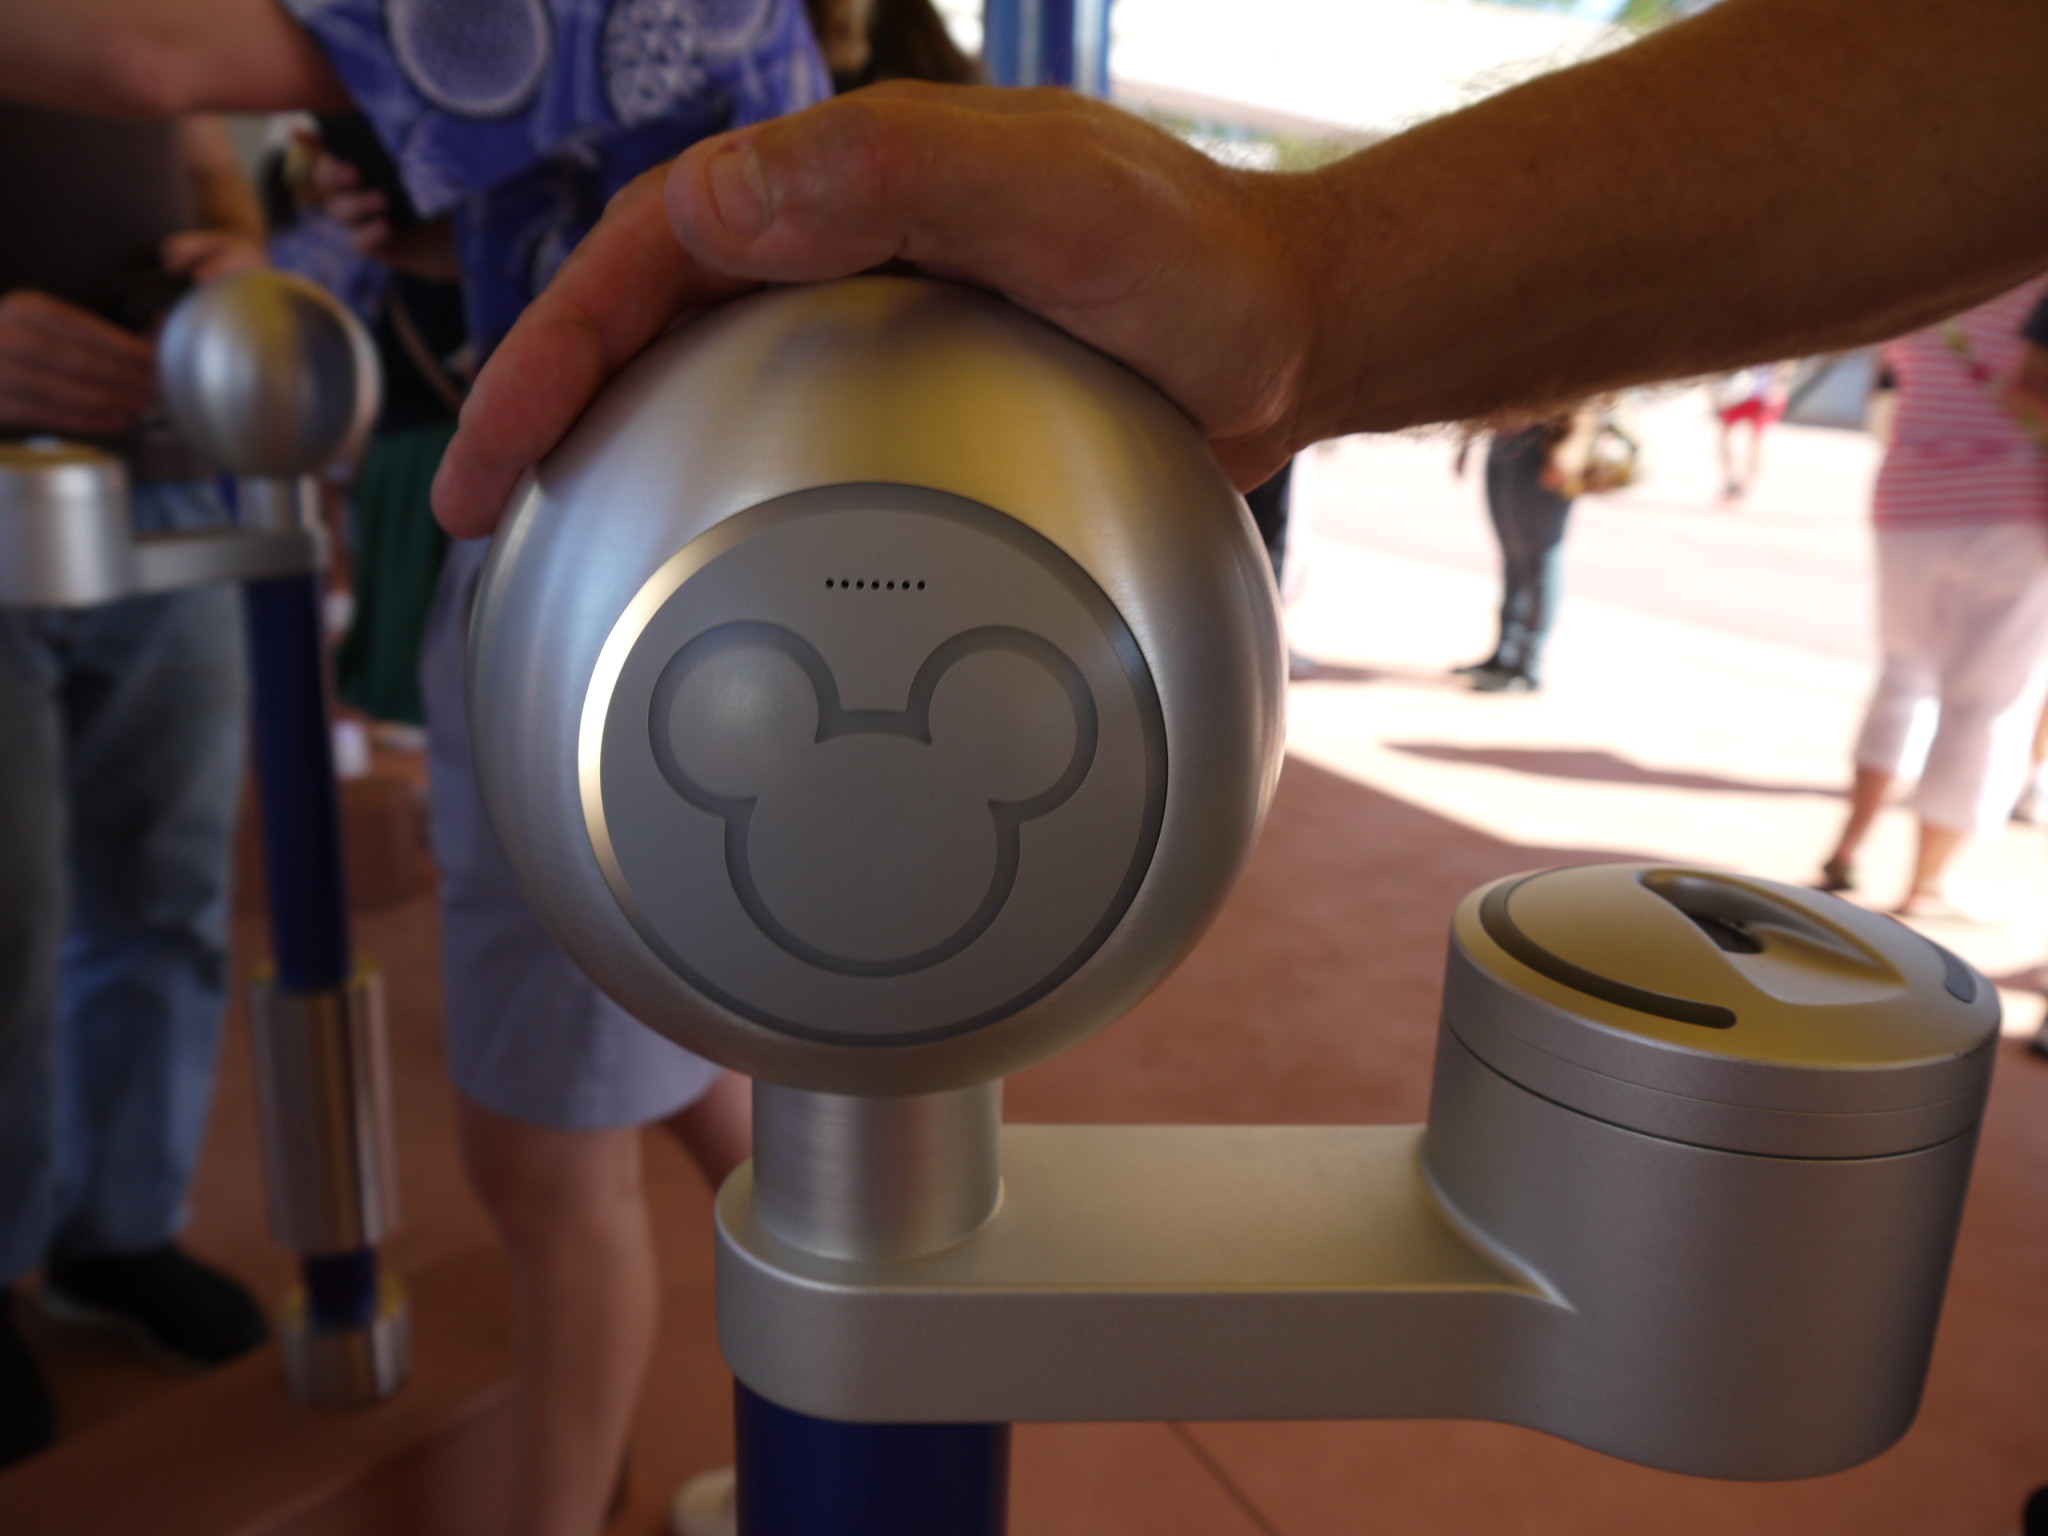 Epcot Testing Restrictions on Fastpass+